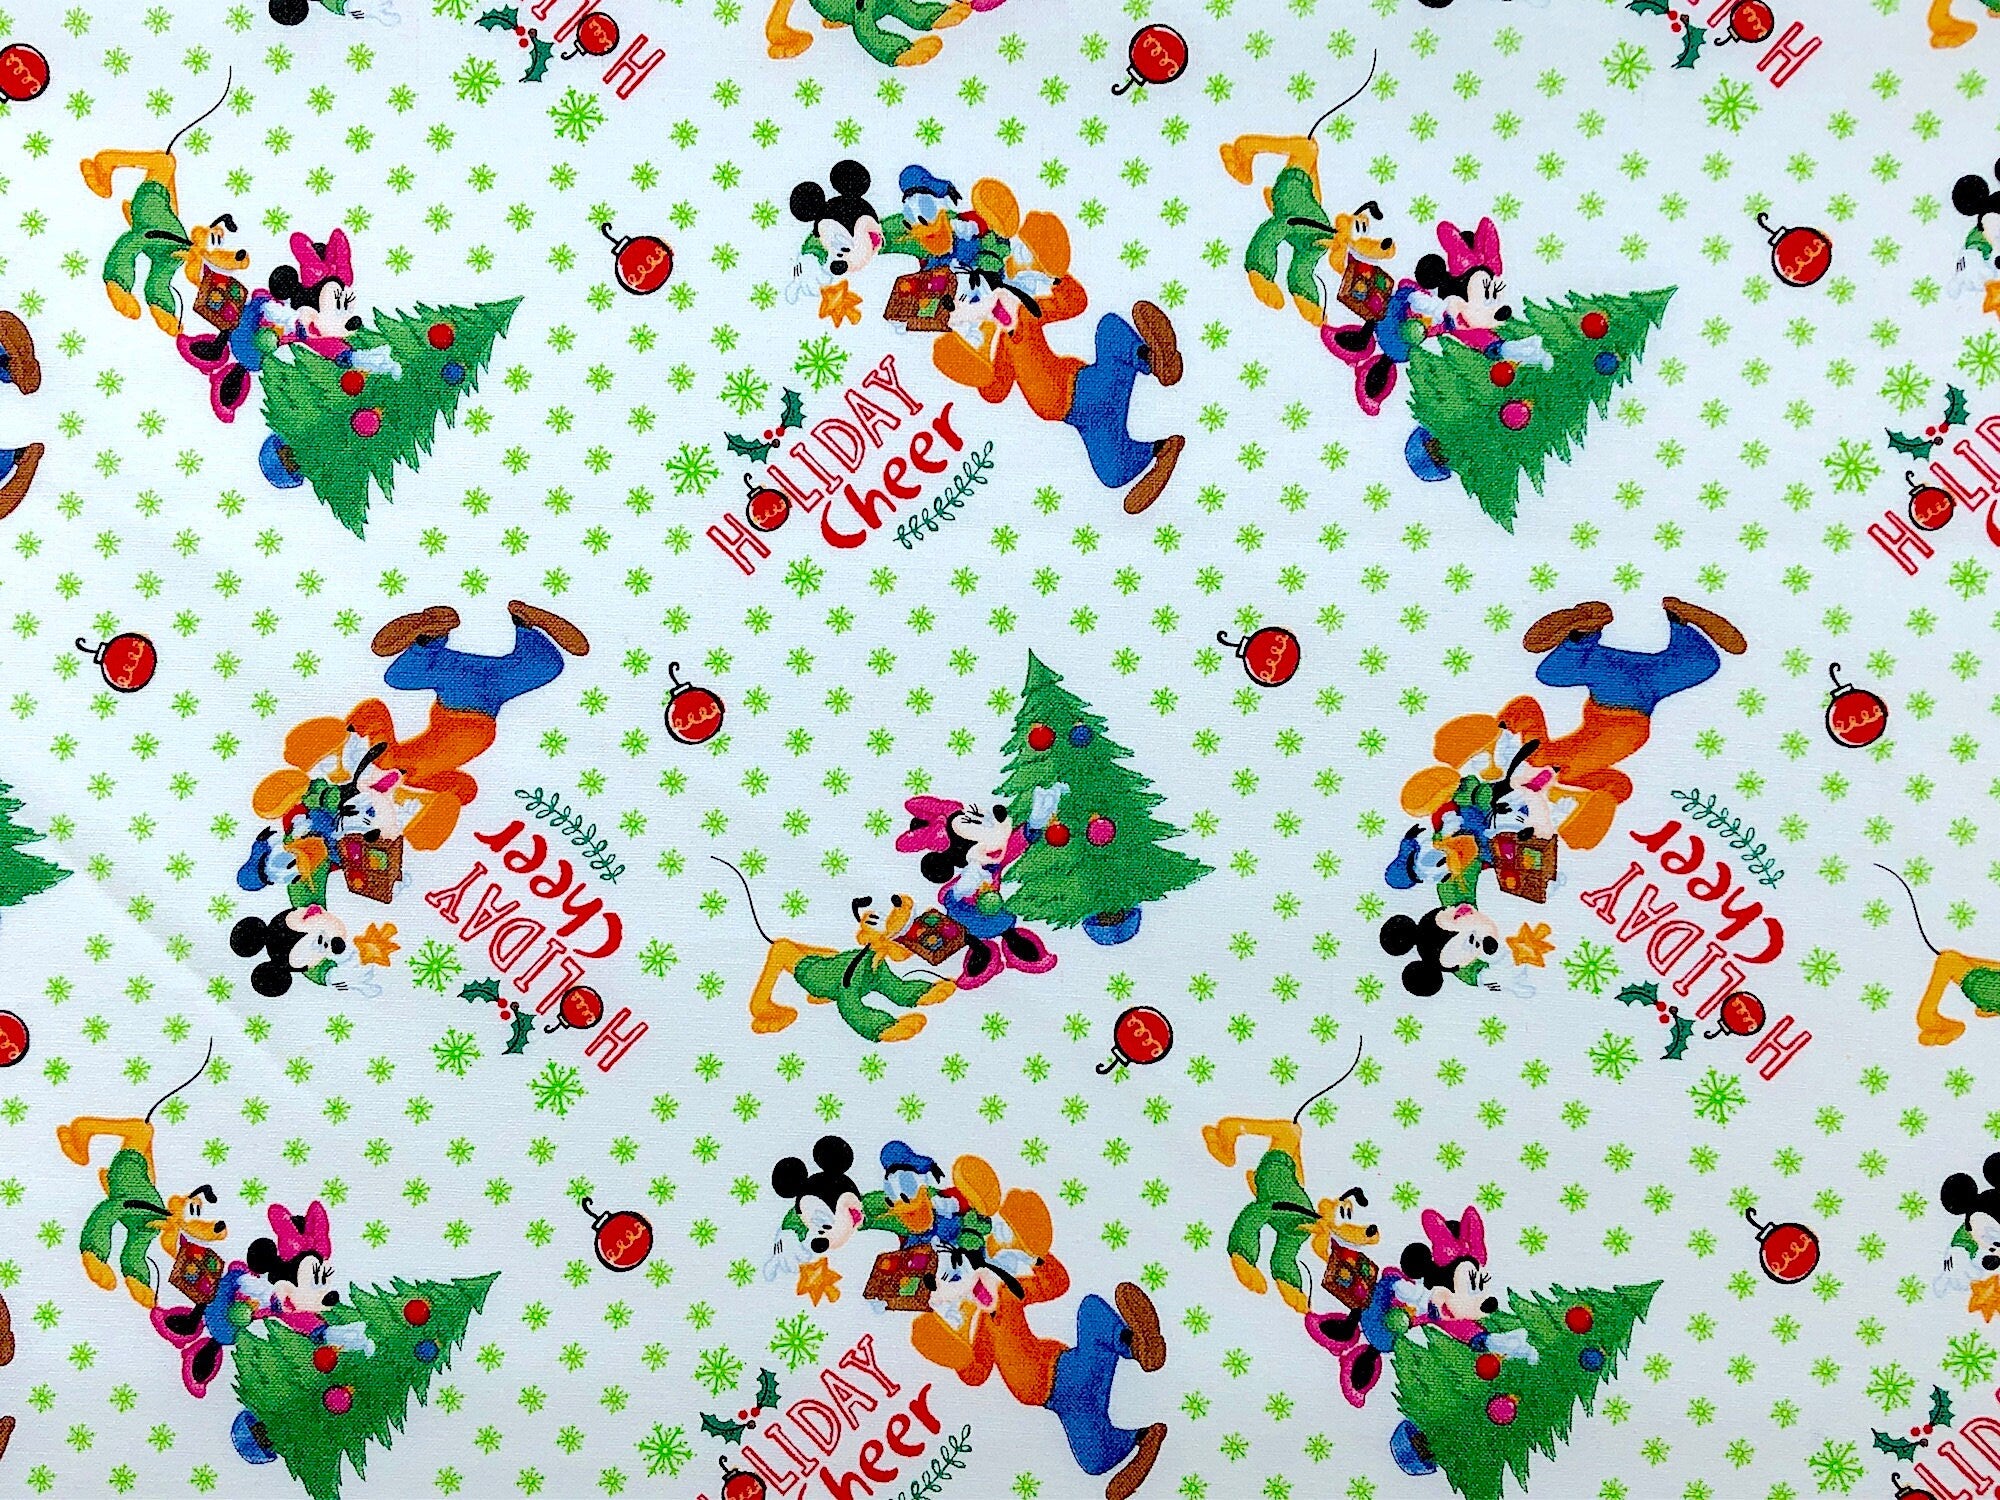 This fabric is called Mickey & Friends Trim the Tree. You will find Mickey Mouse, Minnie Mouse and Pluto trimming a Christmas Tree. Holiday Cheers is printed on the white fabric and there are single ornaments scattered about.